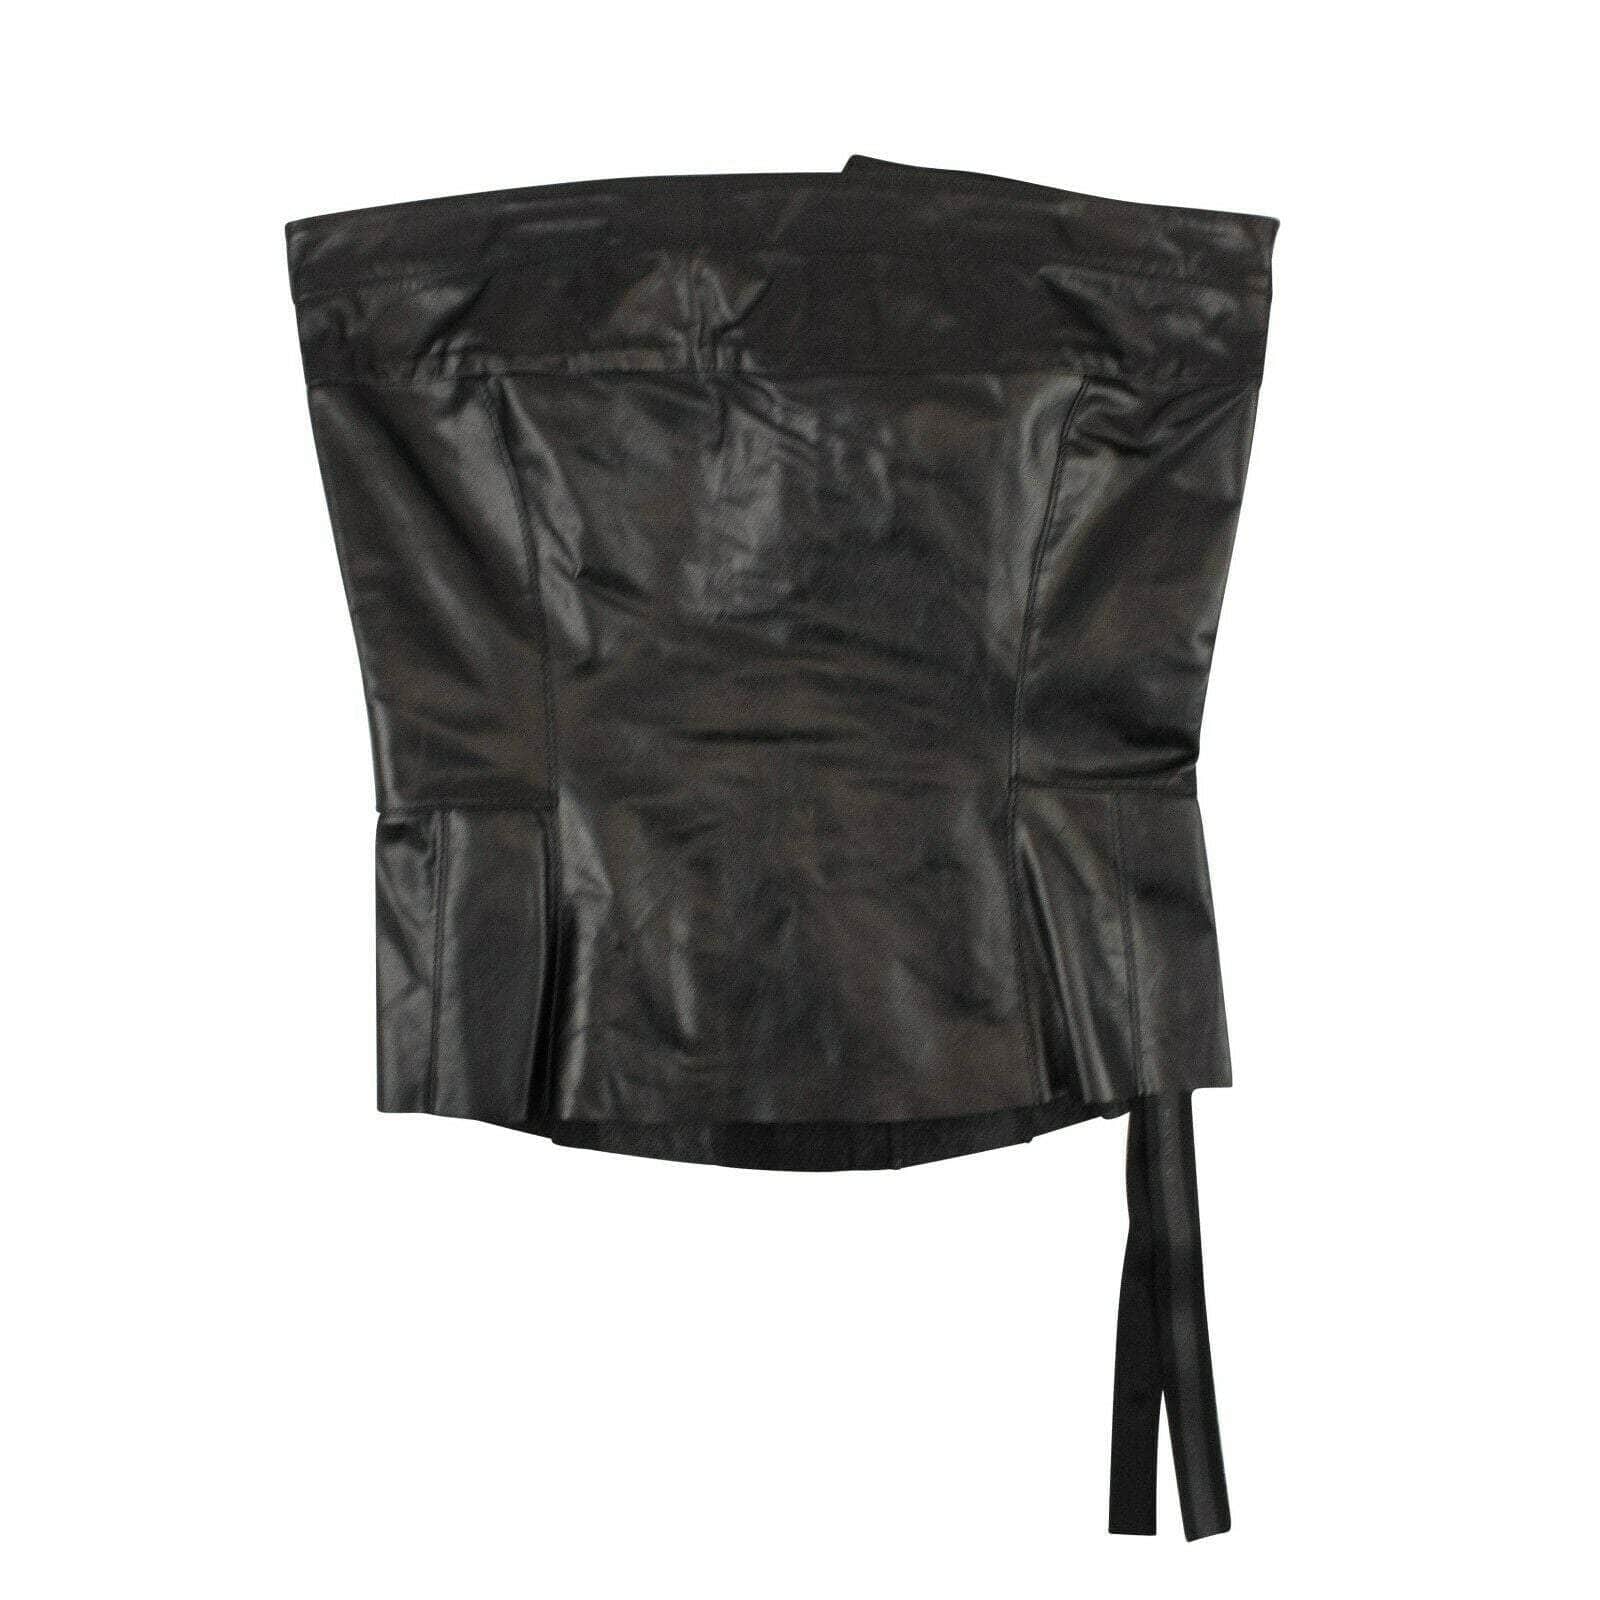 UNRAVEL PROJECT 250-500, channelenable-all, couponcollection, gender-womens, main-clothing, sale-enable, size-m, size-s, unravel-project, womens-crop-tops S Black Leather Corset Top 82NGG-UN-1185/S 82NGG-UN-1185/S